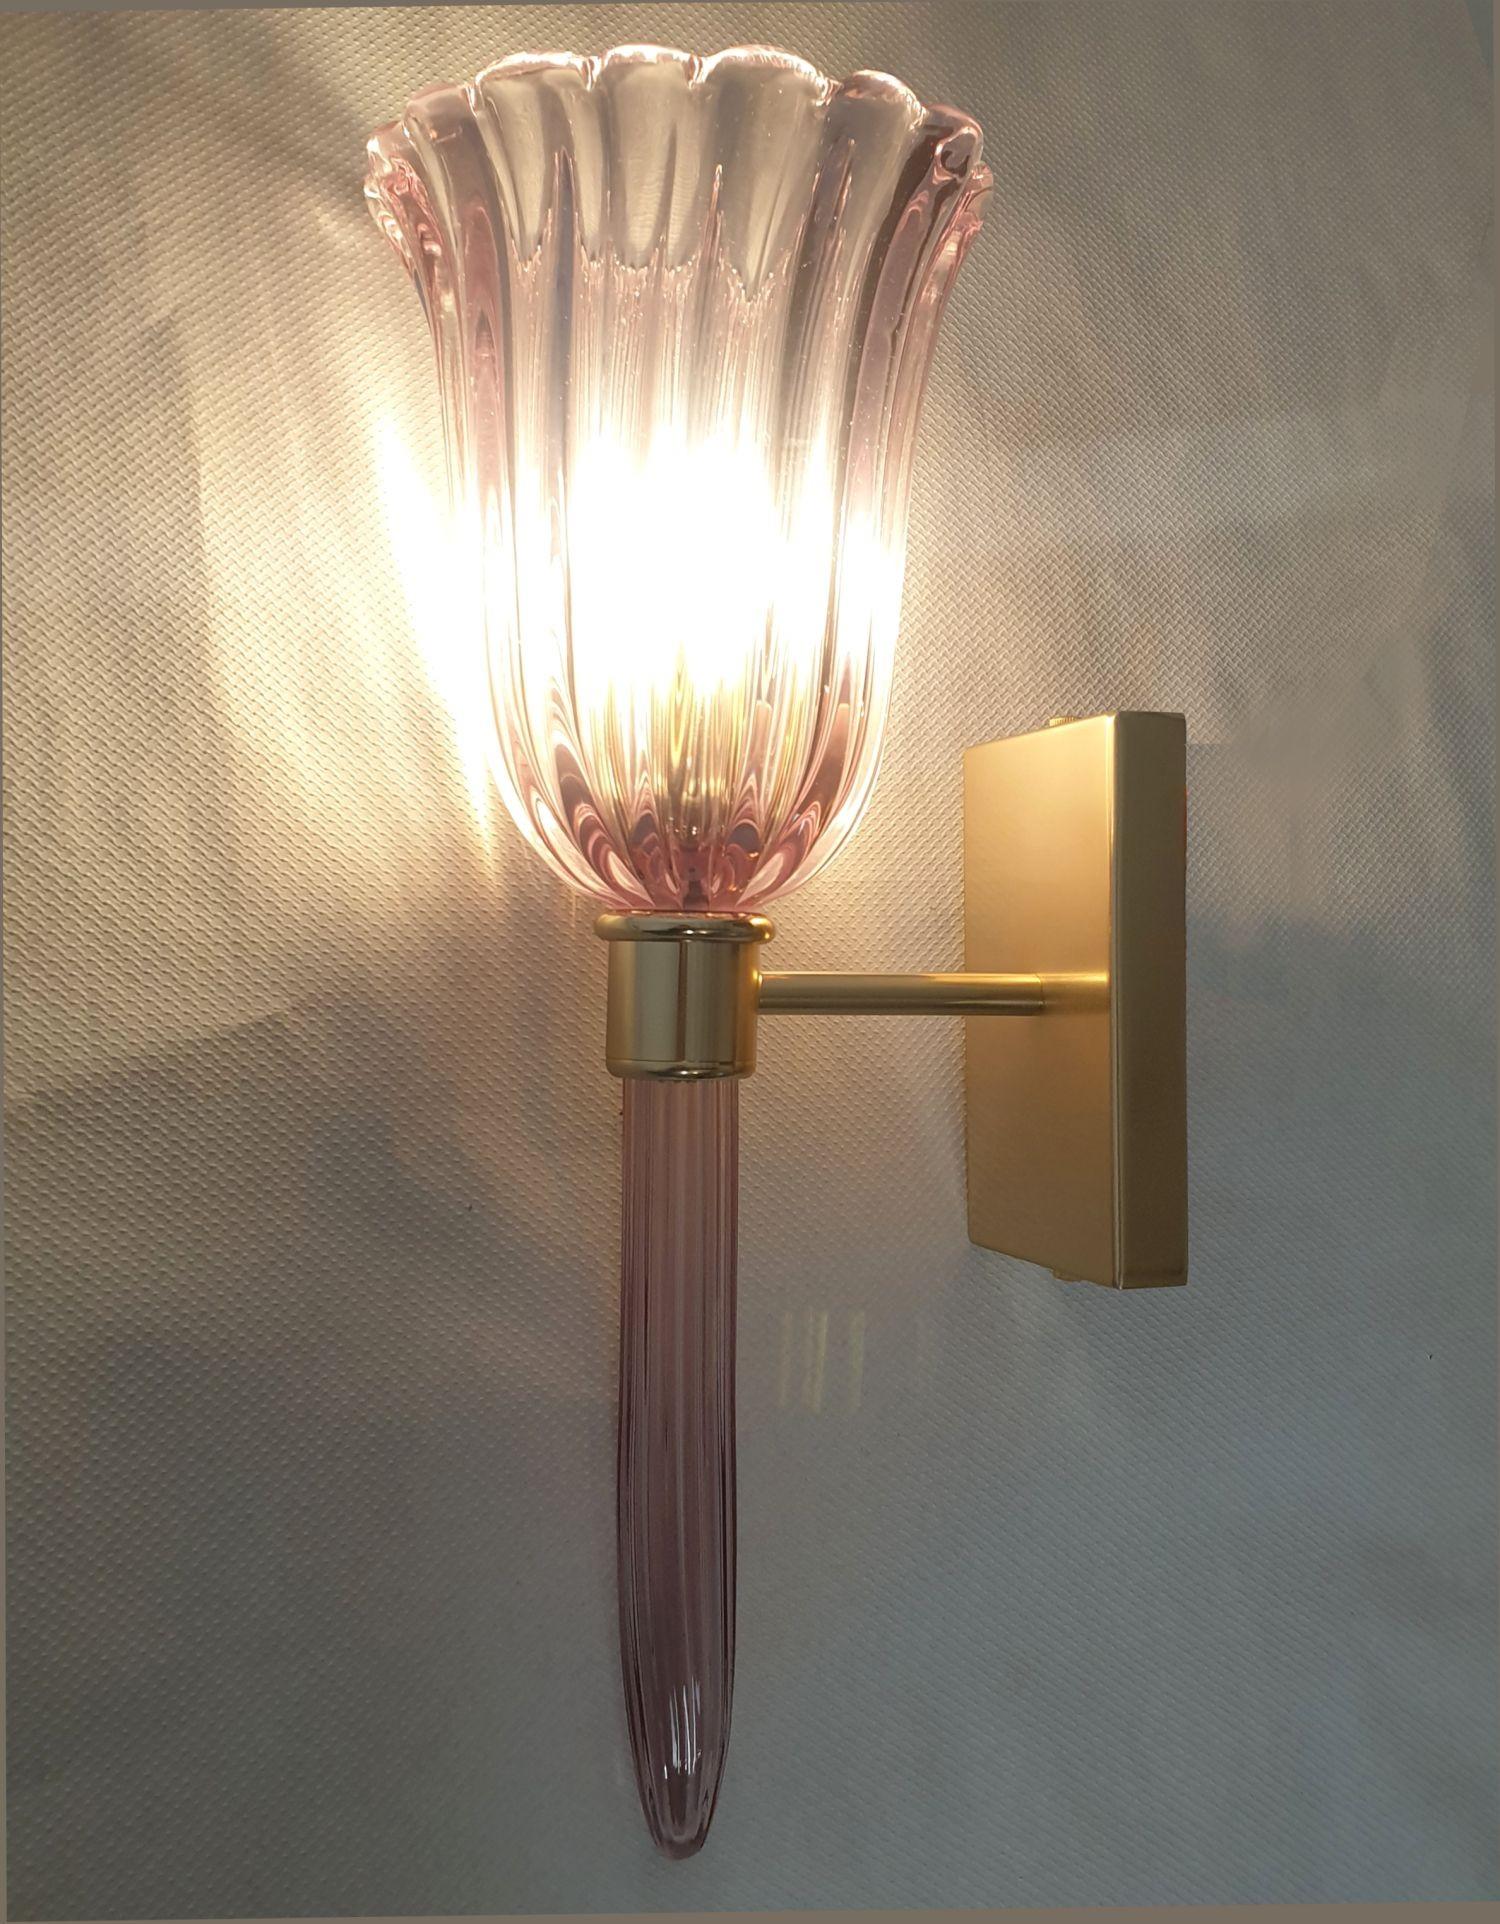 Pair of Neoclassical Handmade Murano glass sconces, attributed to Venini, Italy 1980s.
The Murano glass is in a delicate lilac/purple color - it's thickness makes it translucent.
The mounts are gold plated. The back plate is: H 5.9 x W 3.54